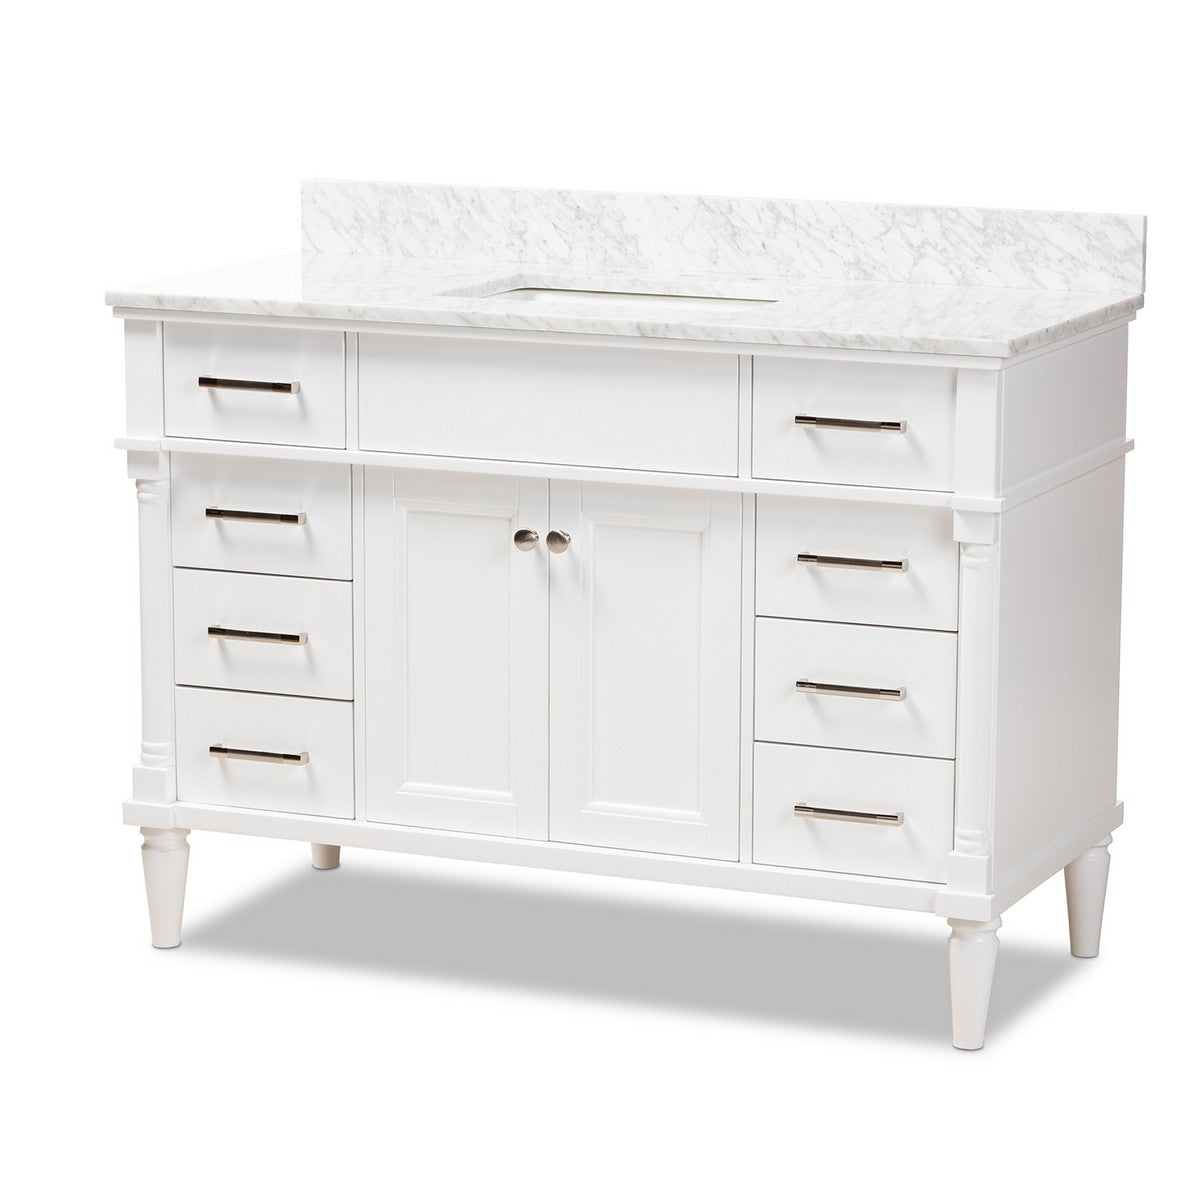 Baxton Studio Monte 48-Inch Transitional White finished Wood and Marble Single Sink Bathroom Vanity Baxton Studio-Bathroom Vanities-Minimal And Modern - 1